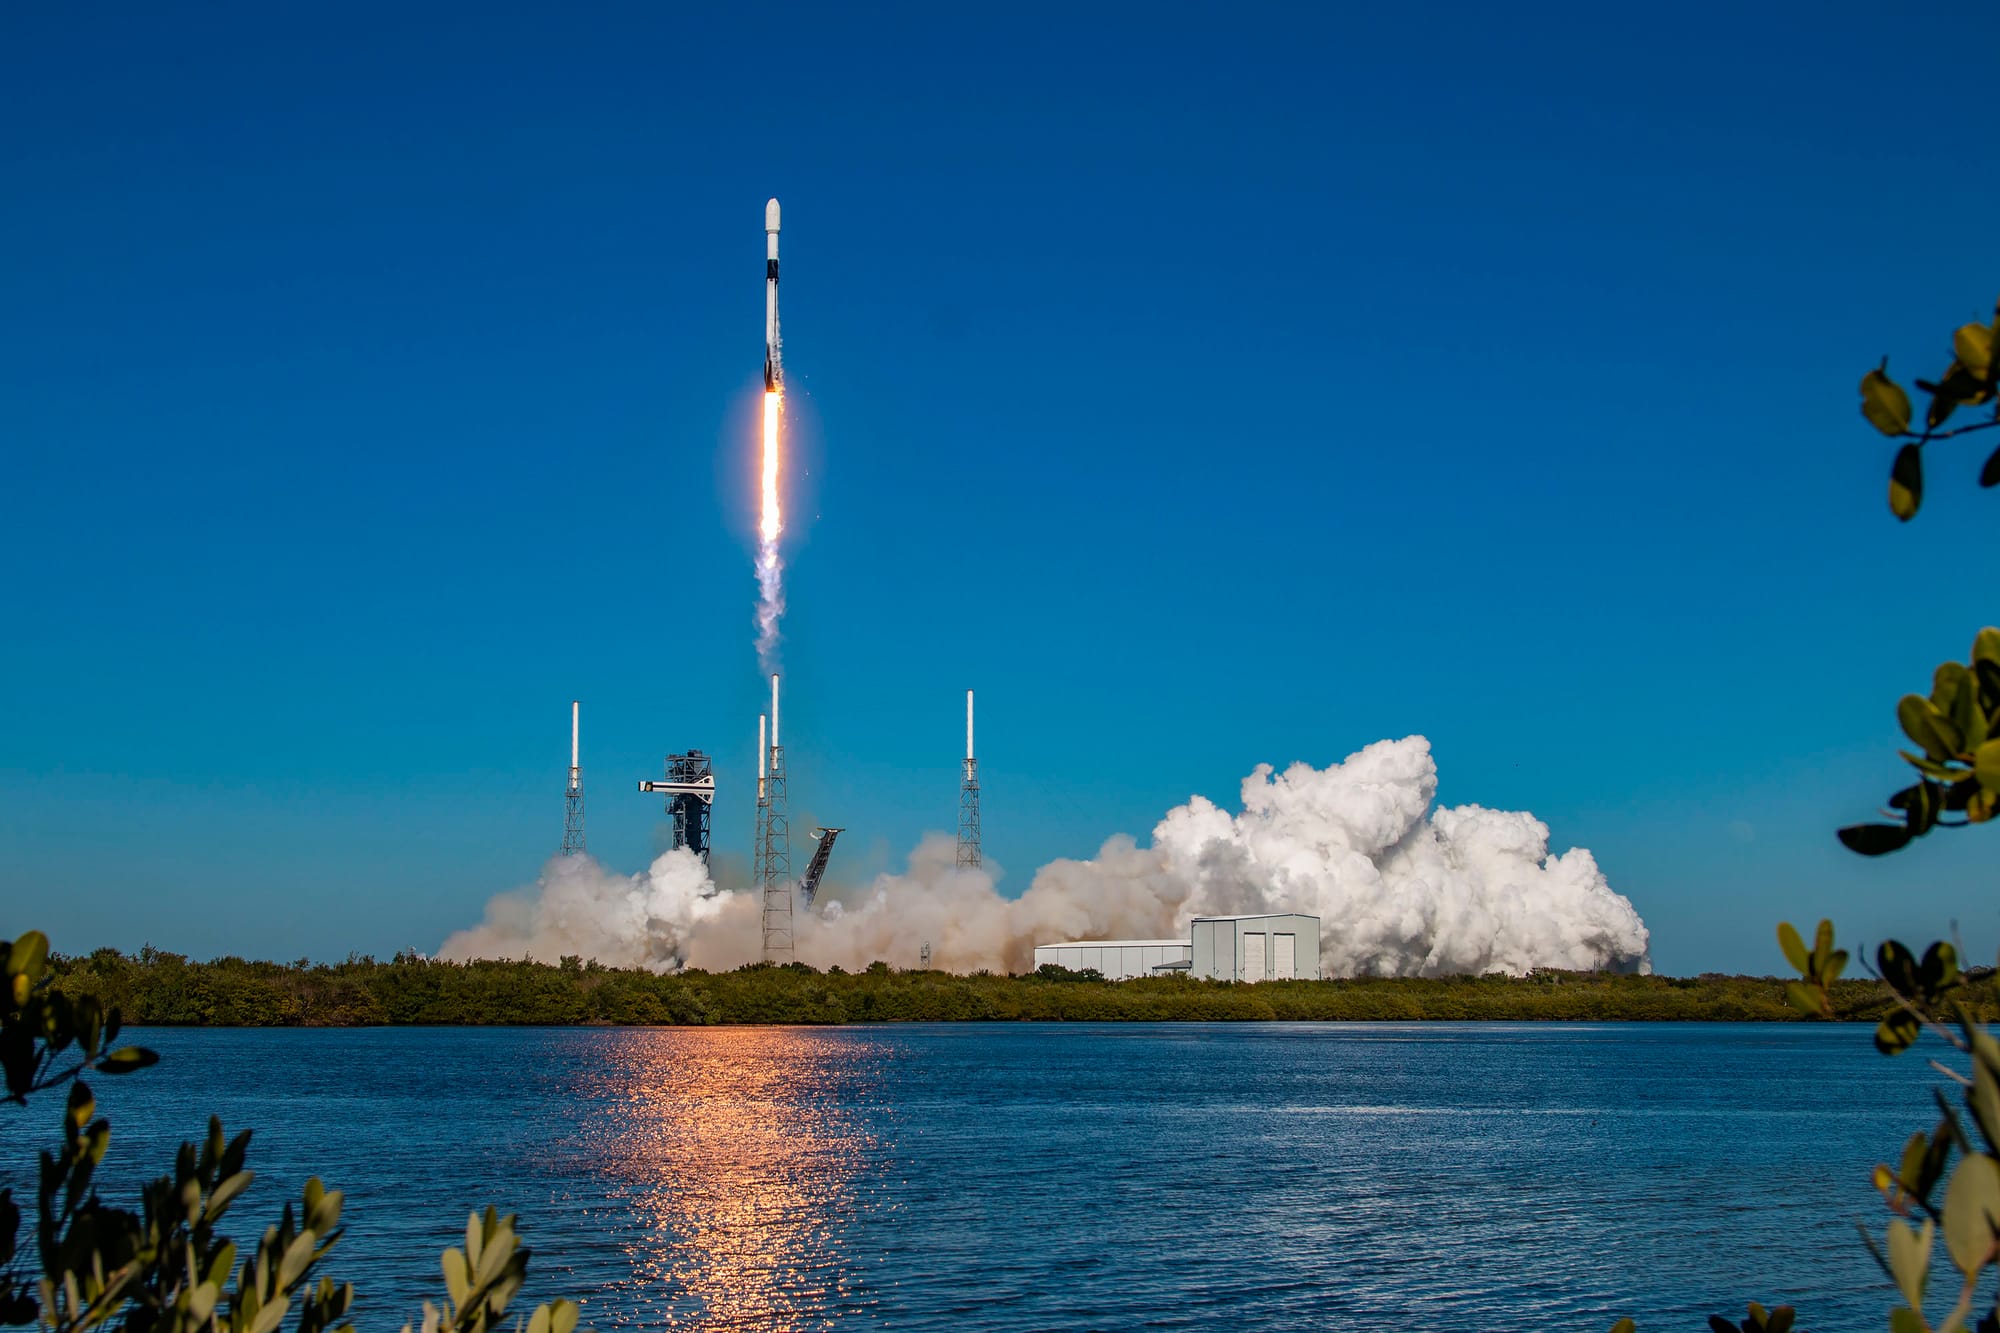 Falcon 9 lifting off from Space Launch Complex 40. ©SpaceX